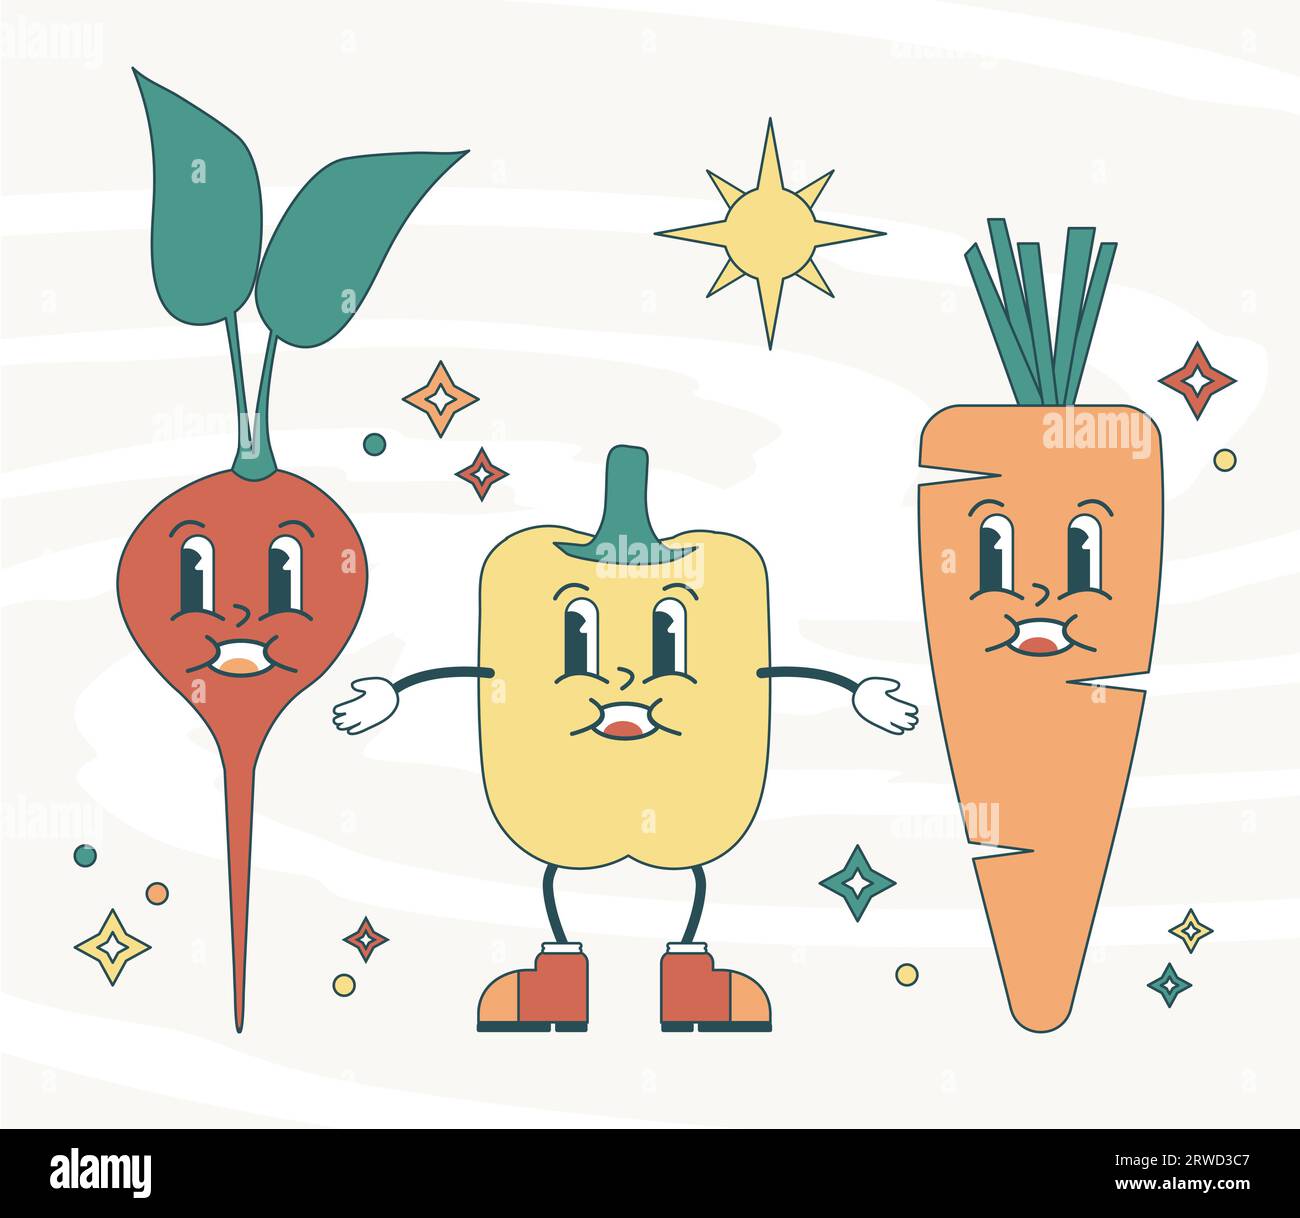 Groovy Cute Illustration of Radish, Paprika and Carrot Characters Stock Vector